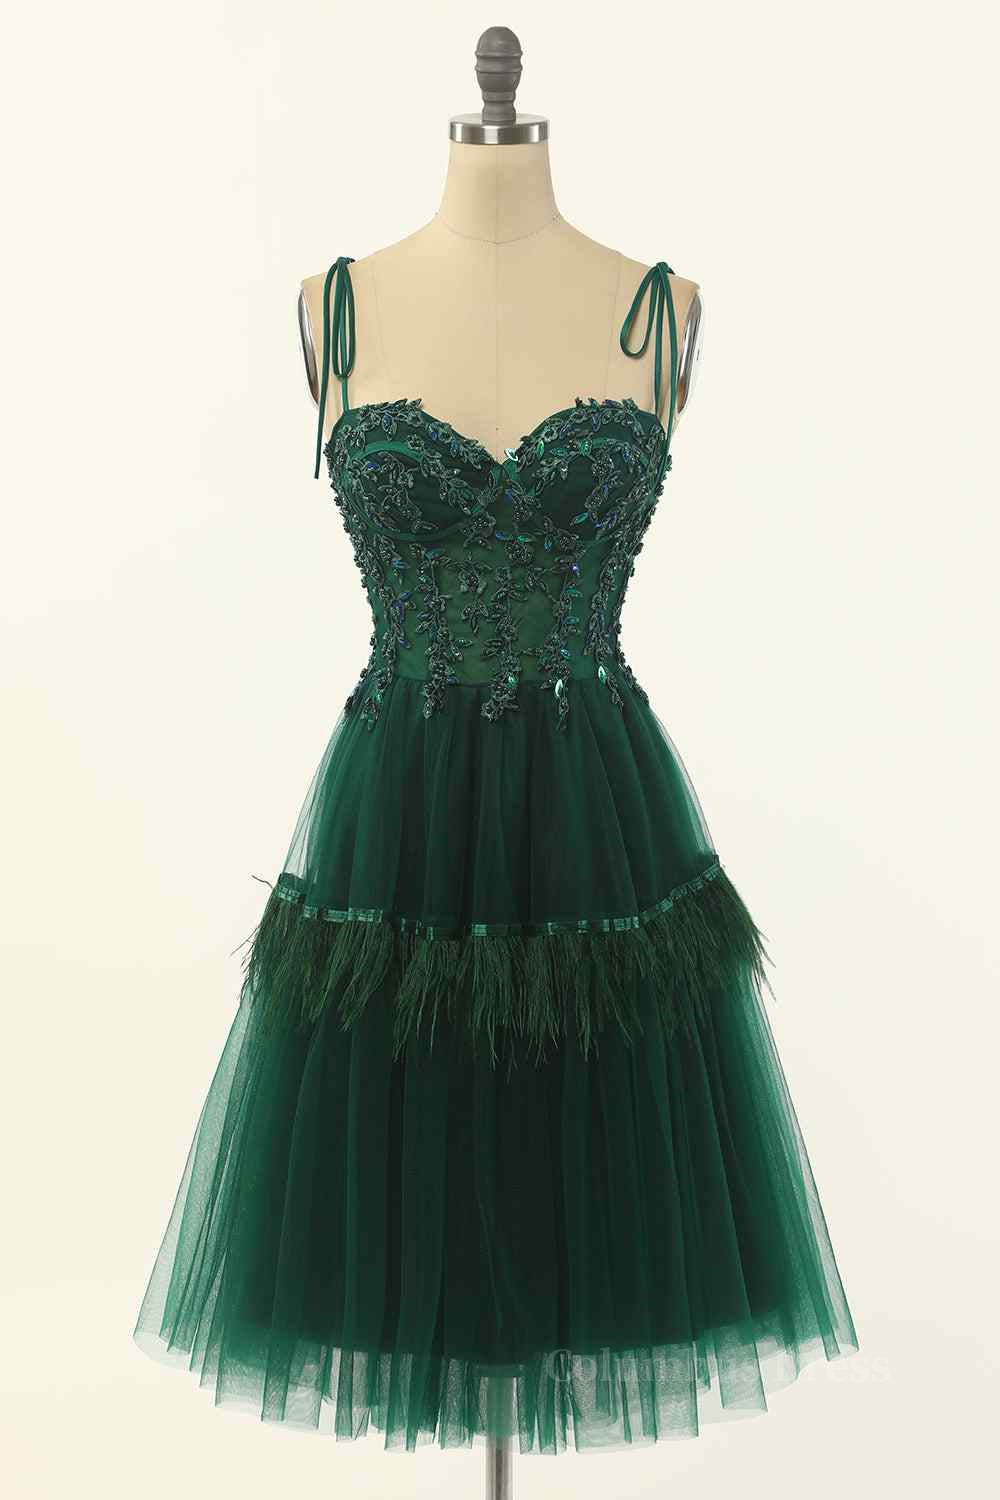 Dark Green A-line Bow Tie Straps Lace-Up Applique Mini Corset Homecoming Dress outfit, Long Black Dress